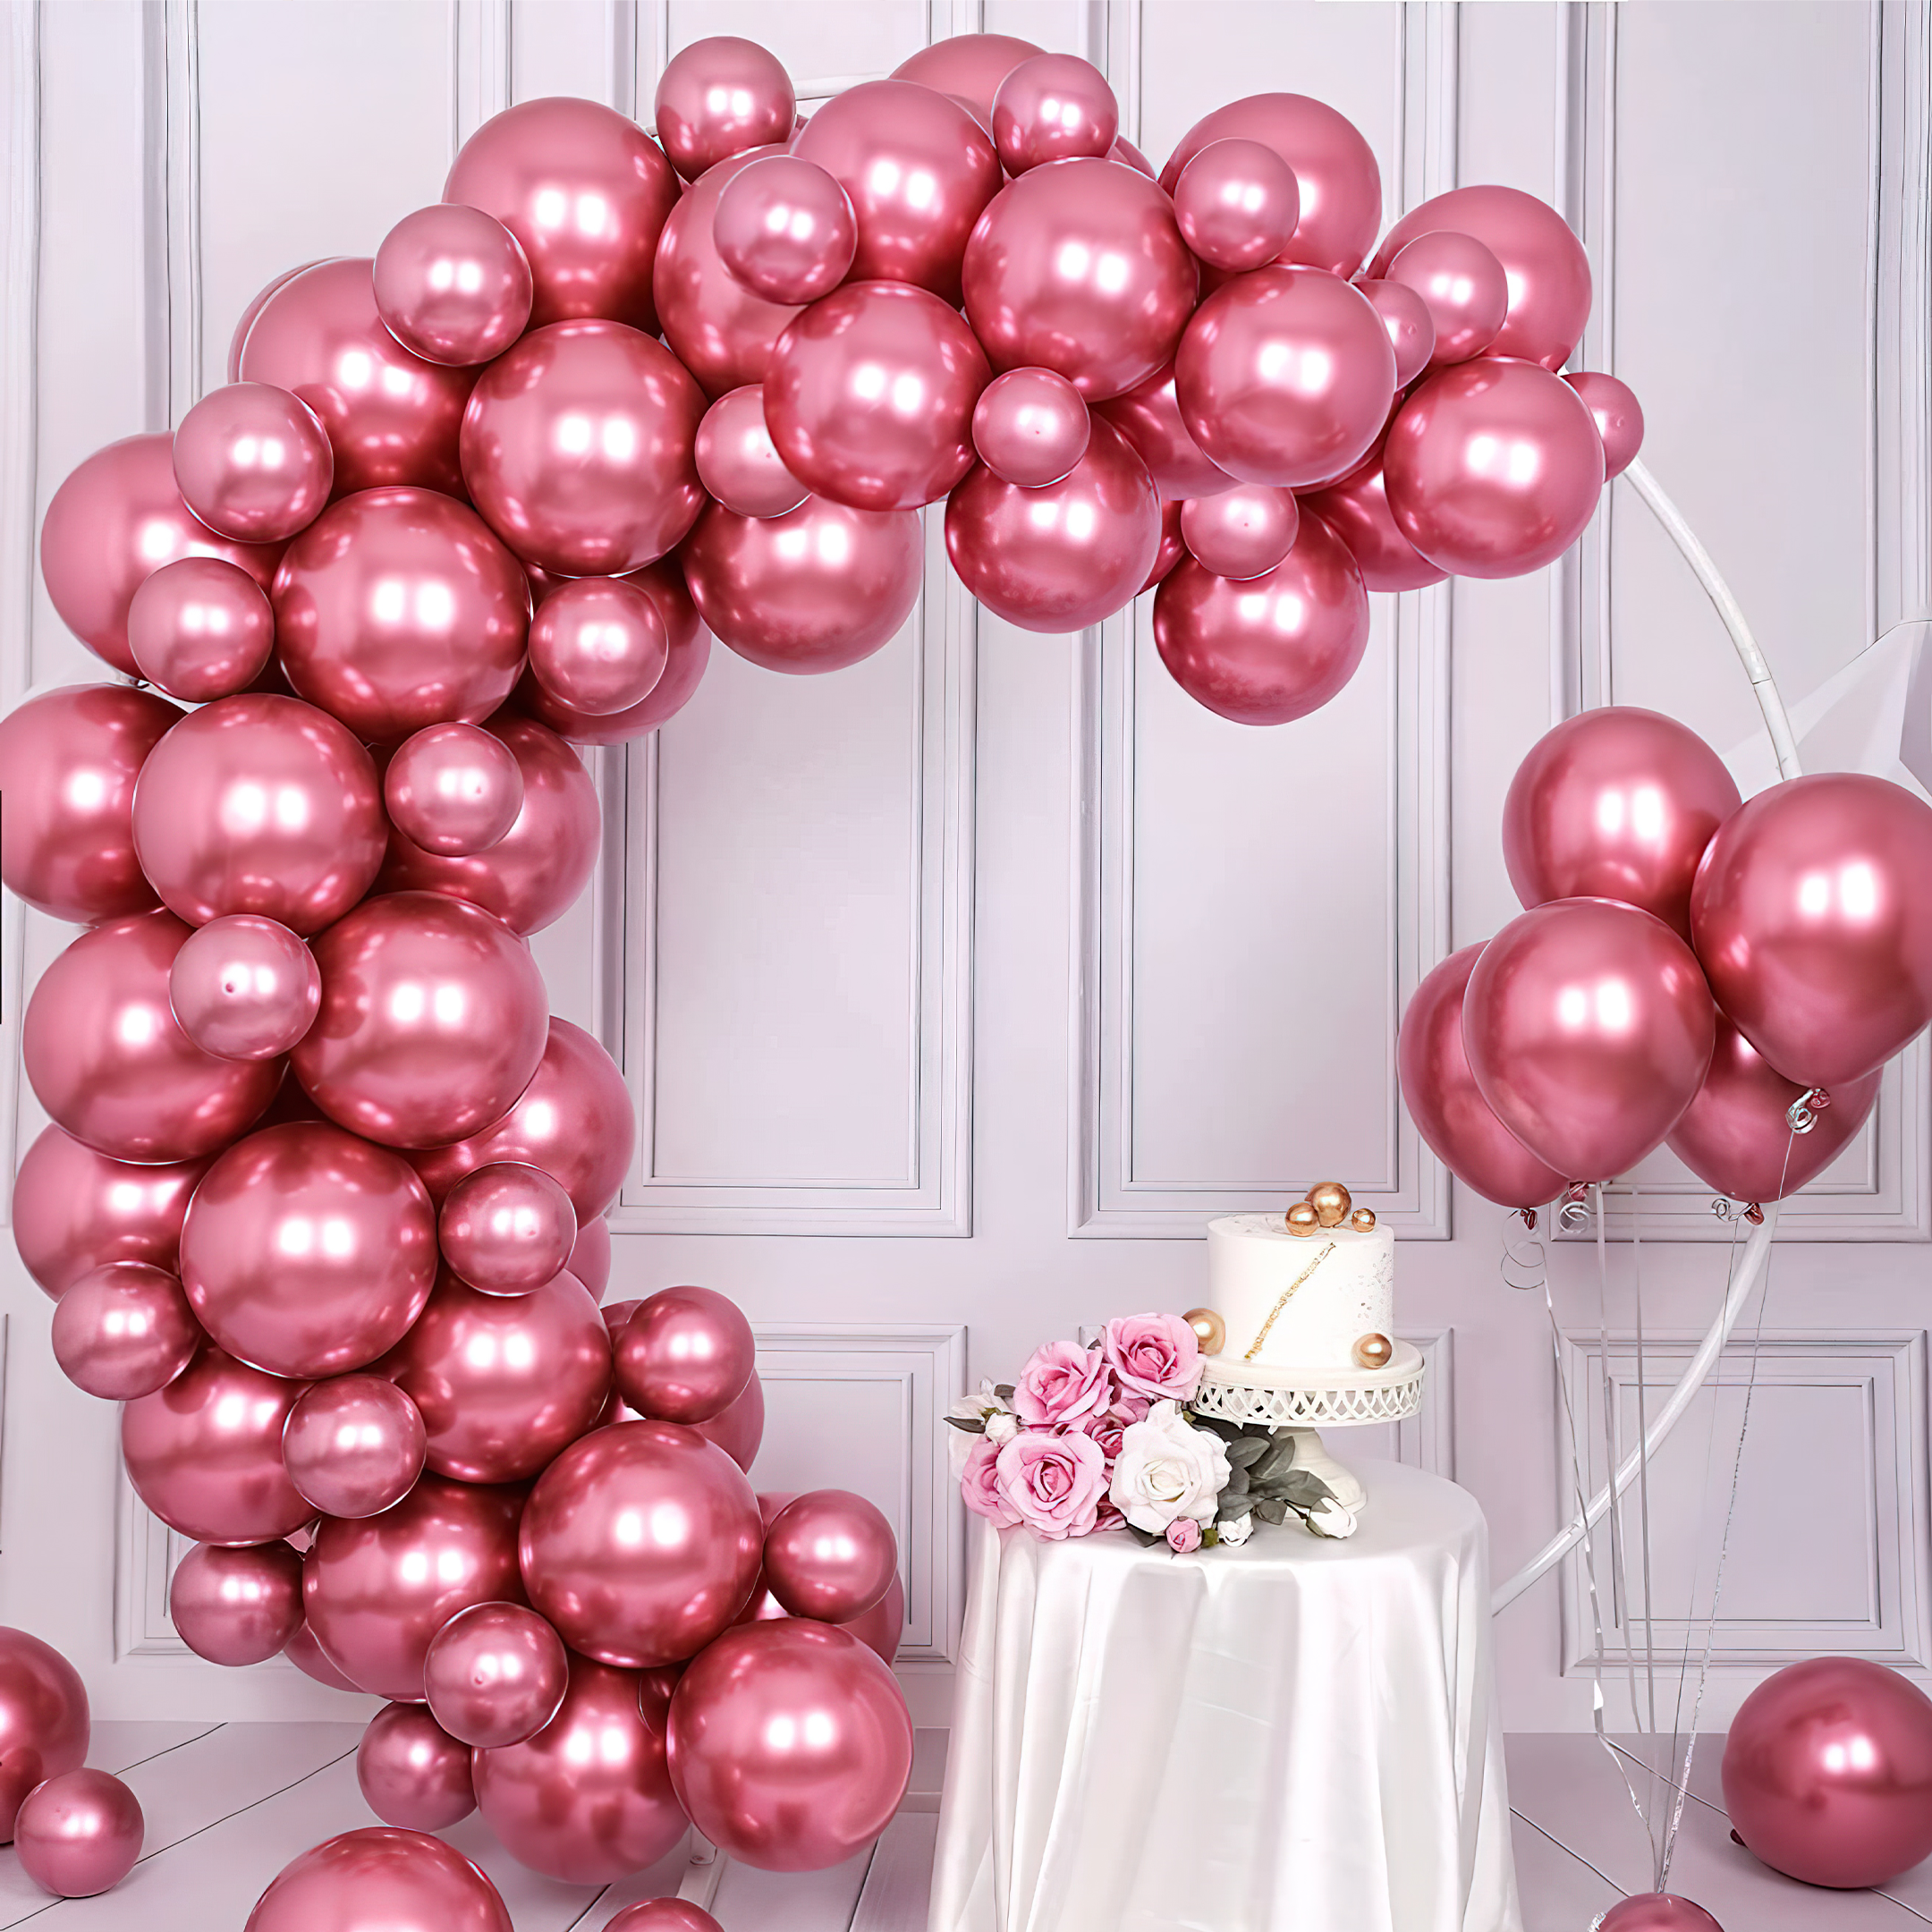 Rose Pink Chrome Balloons for bride to be , birthday party for girls